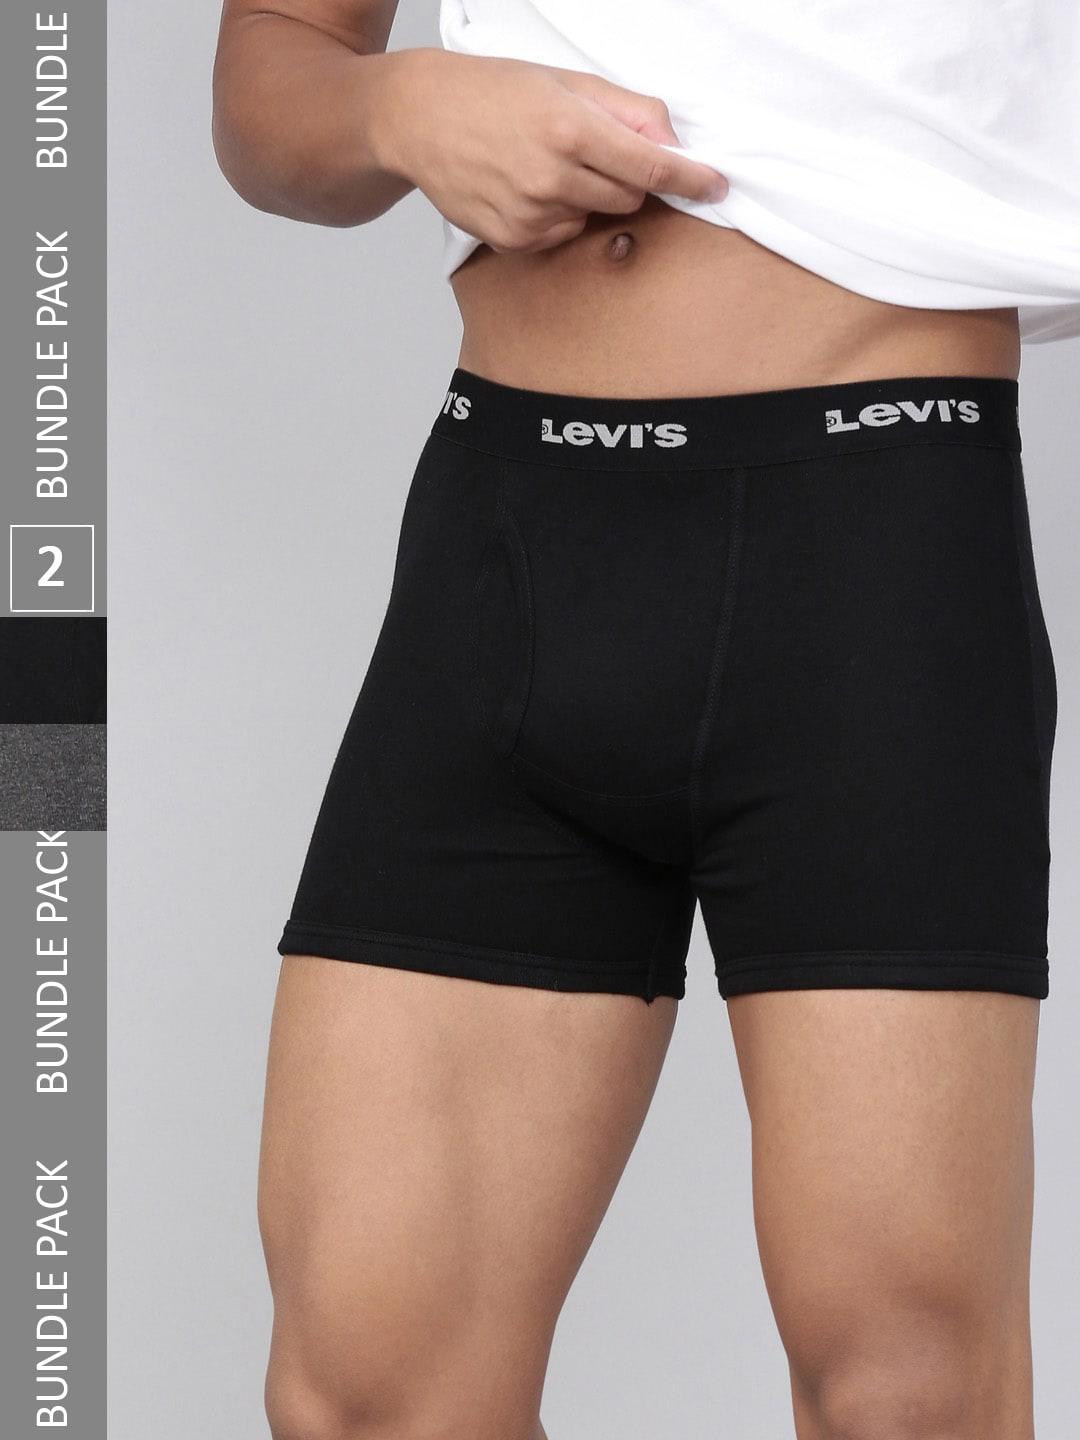 Levis Pack of 2 Smartskin Technology Cotton Trunks with Tag Free Comfort #001-BOXER BRIEF